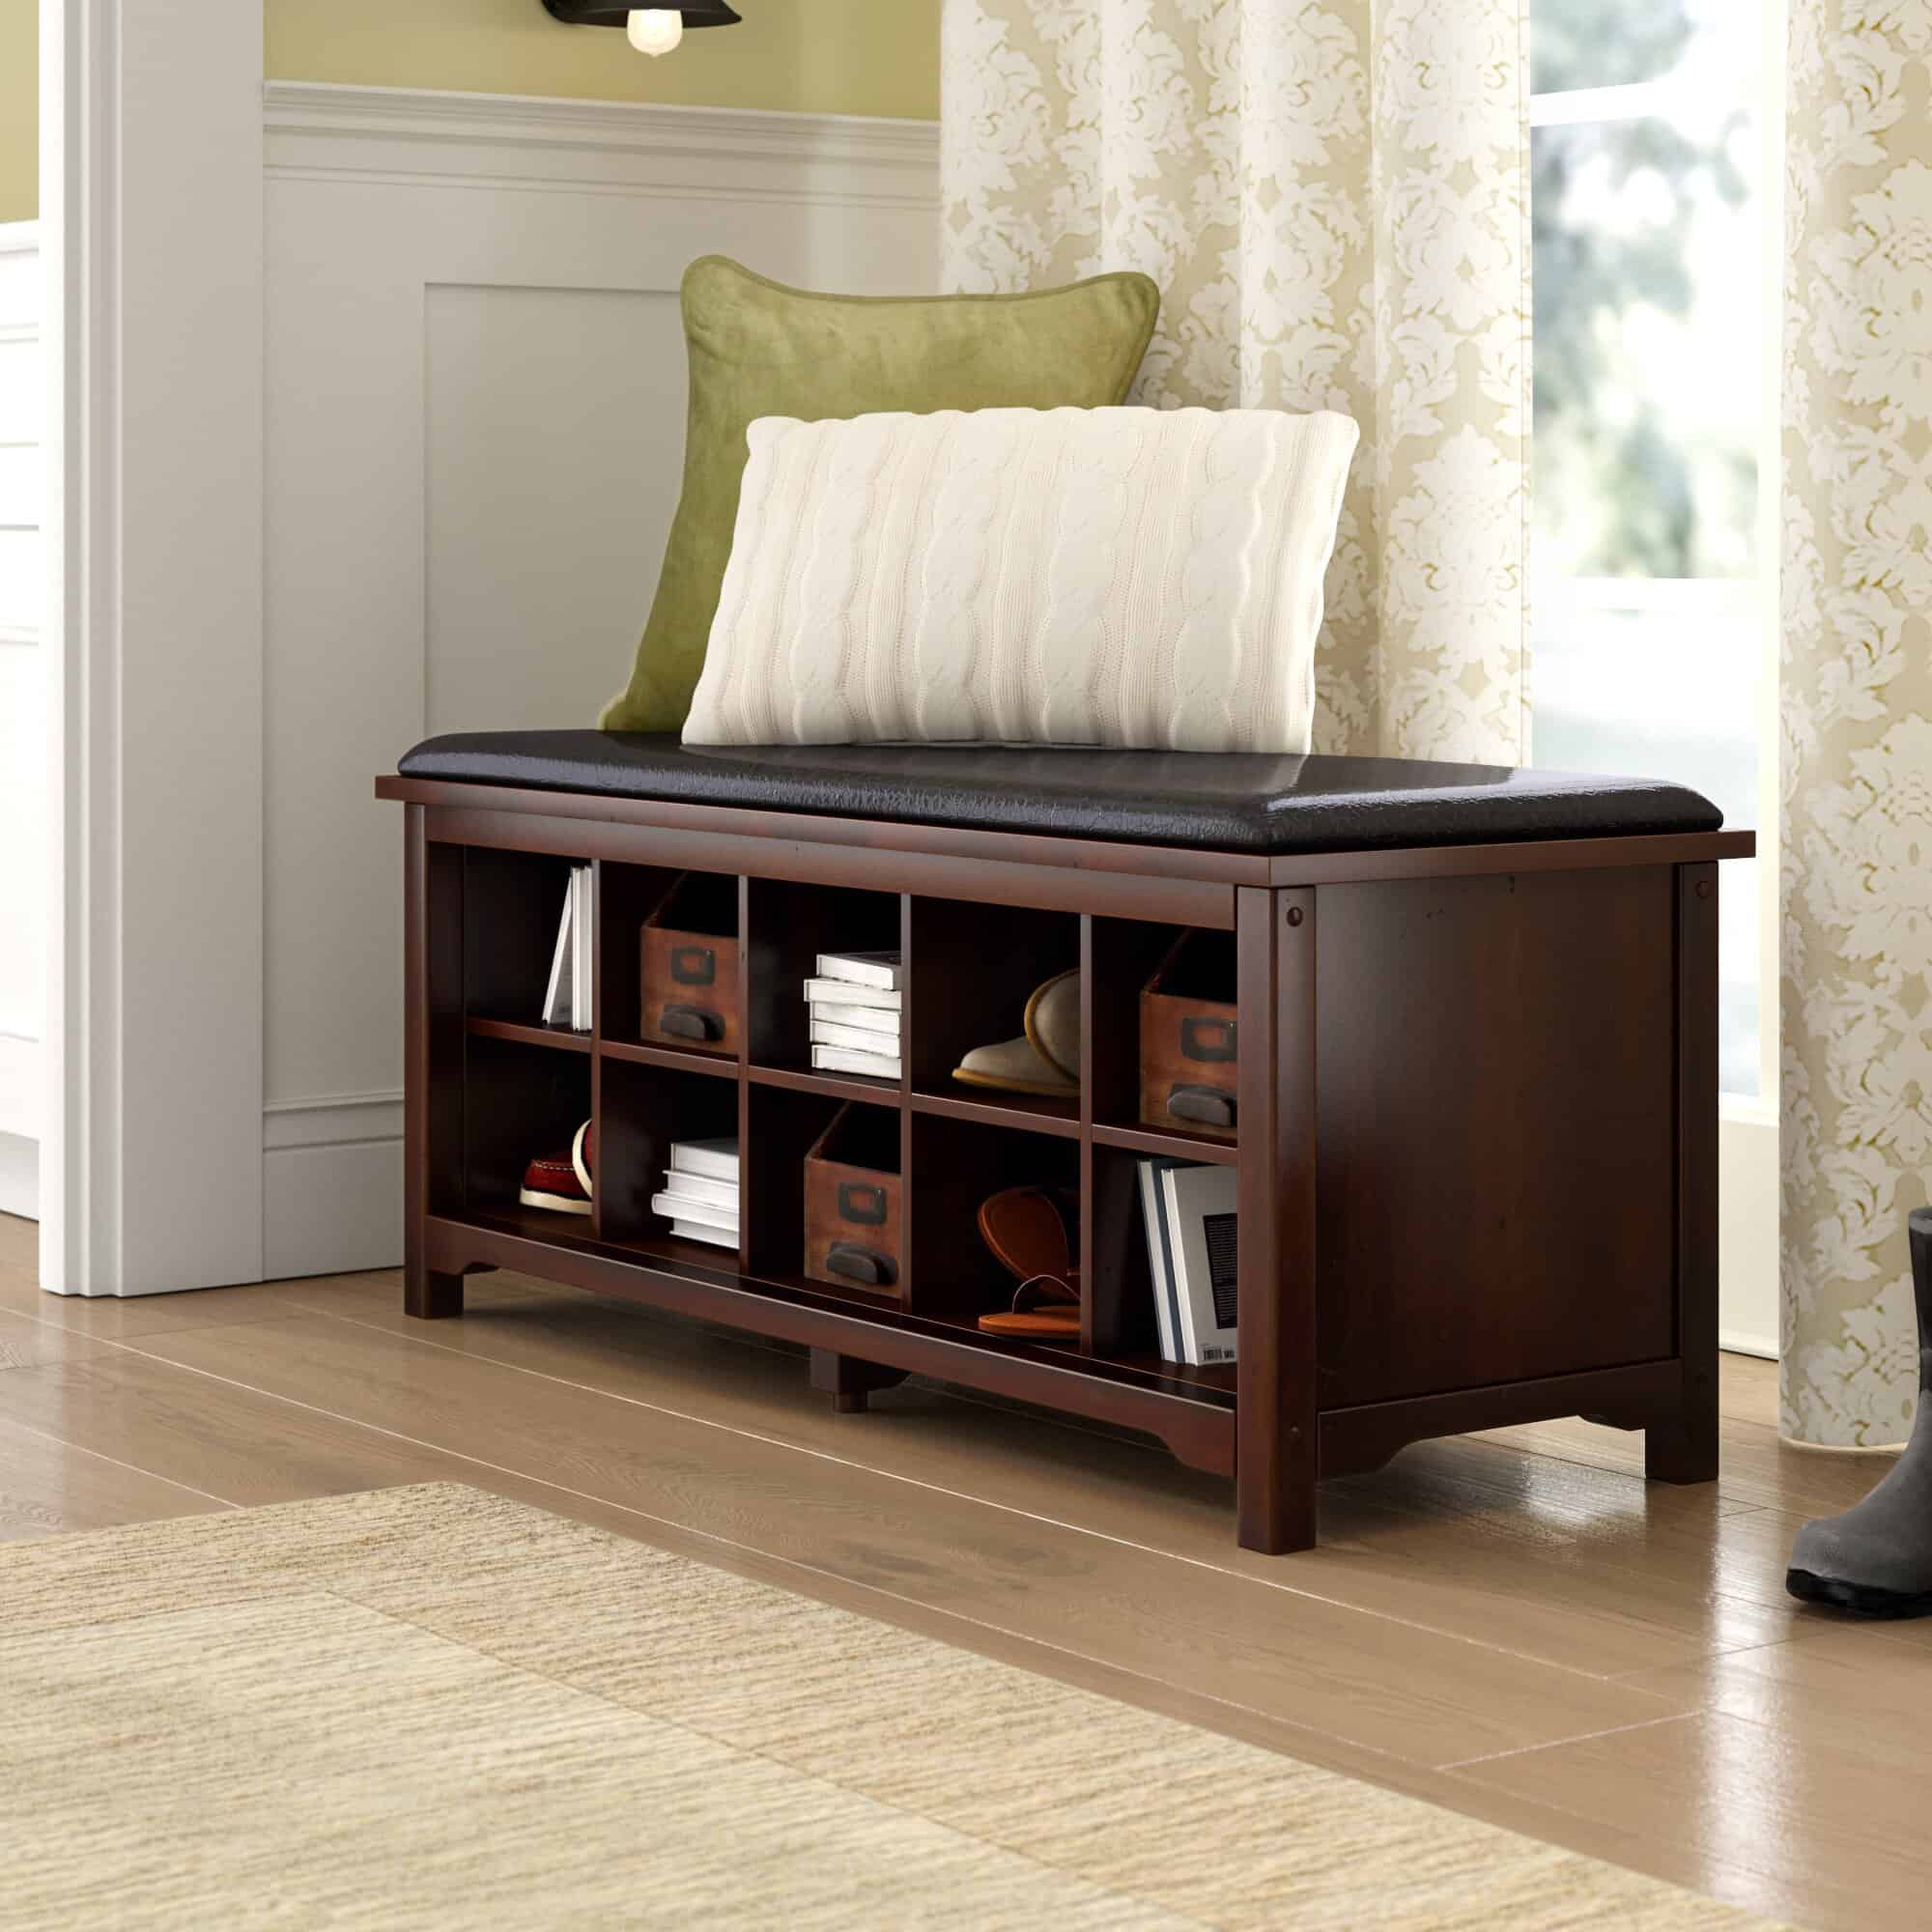 Add A Sophisticated Touch To Your Entryway With A Classic Bench